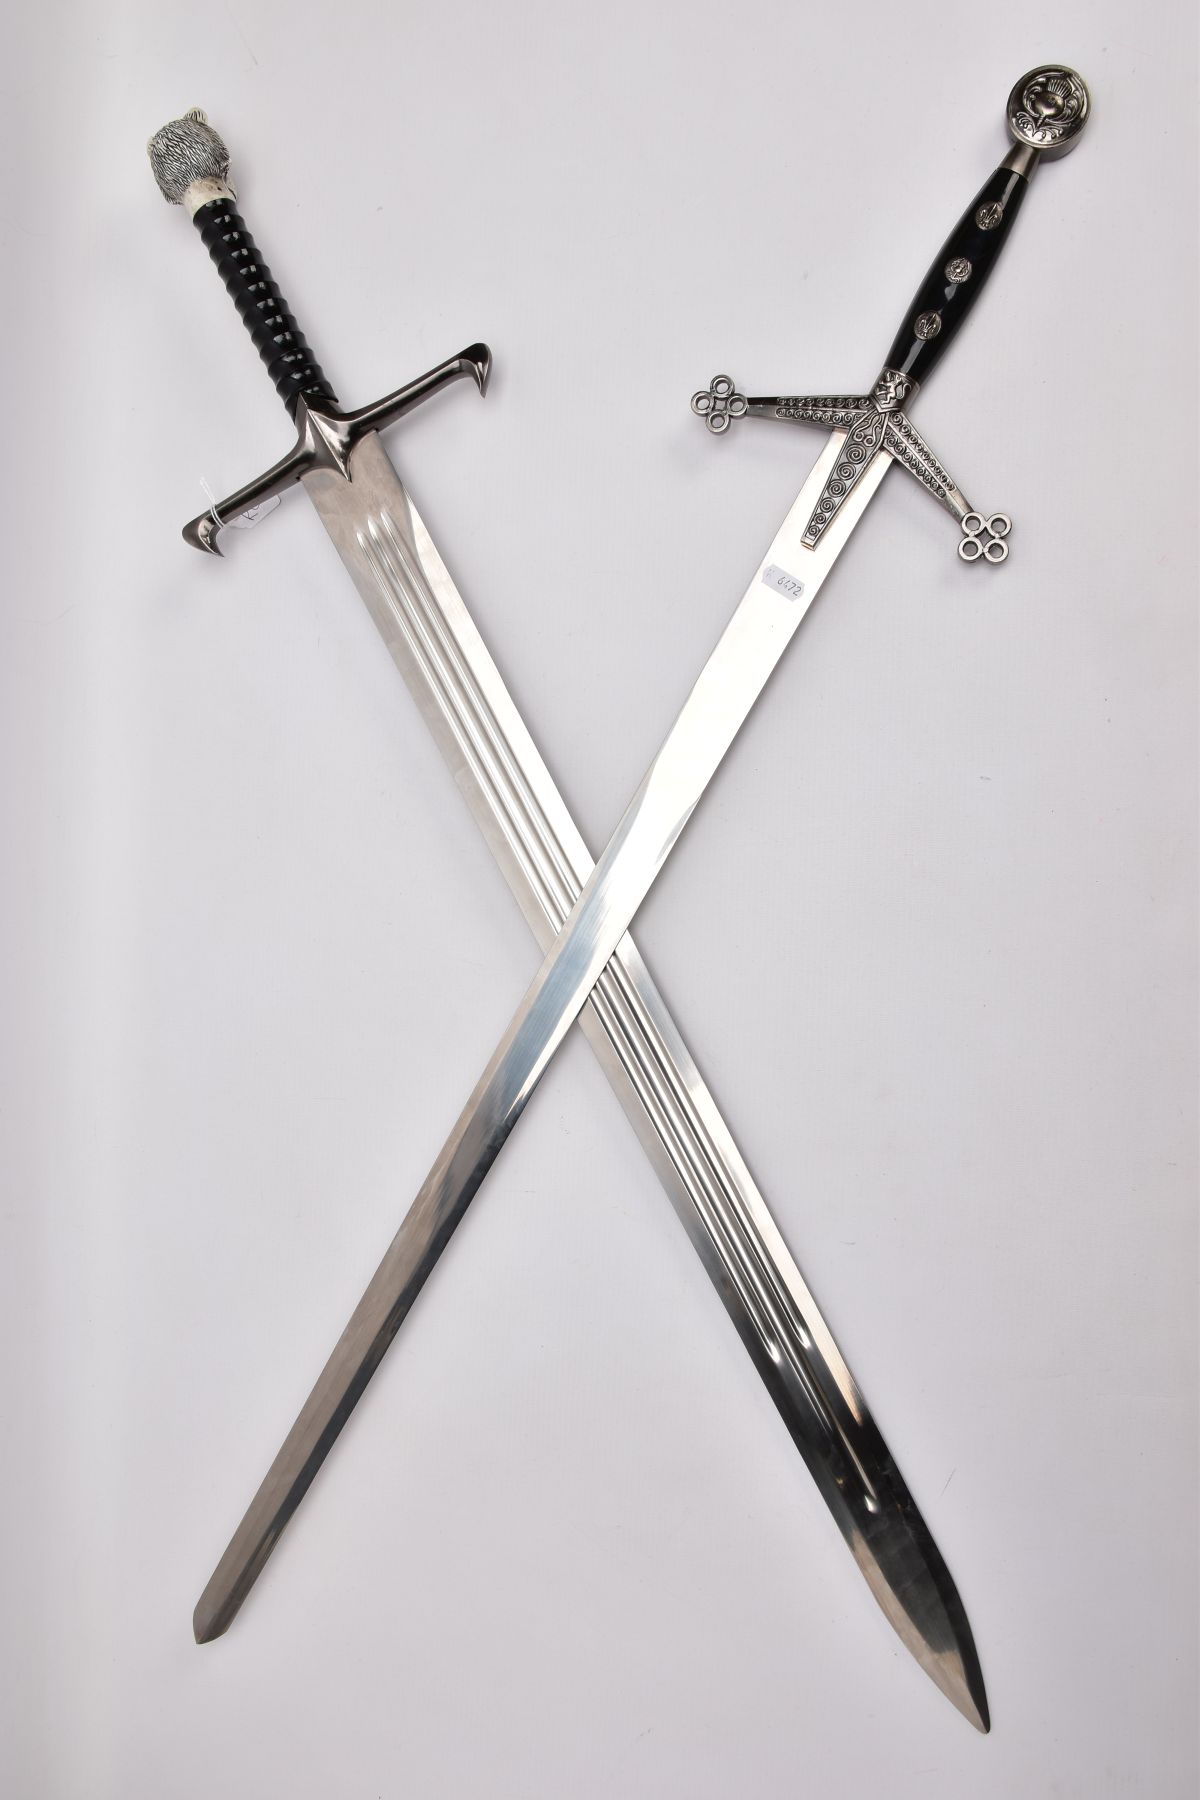 TWO REPLICA COPY SWORDS a Medieval style approximately 83cm length blade, angled downward cross- - Image 7 of 9